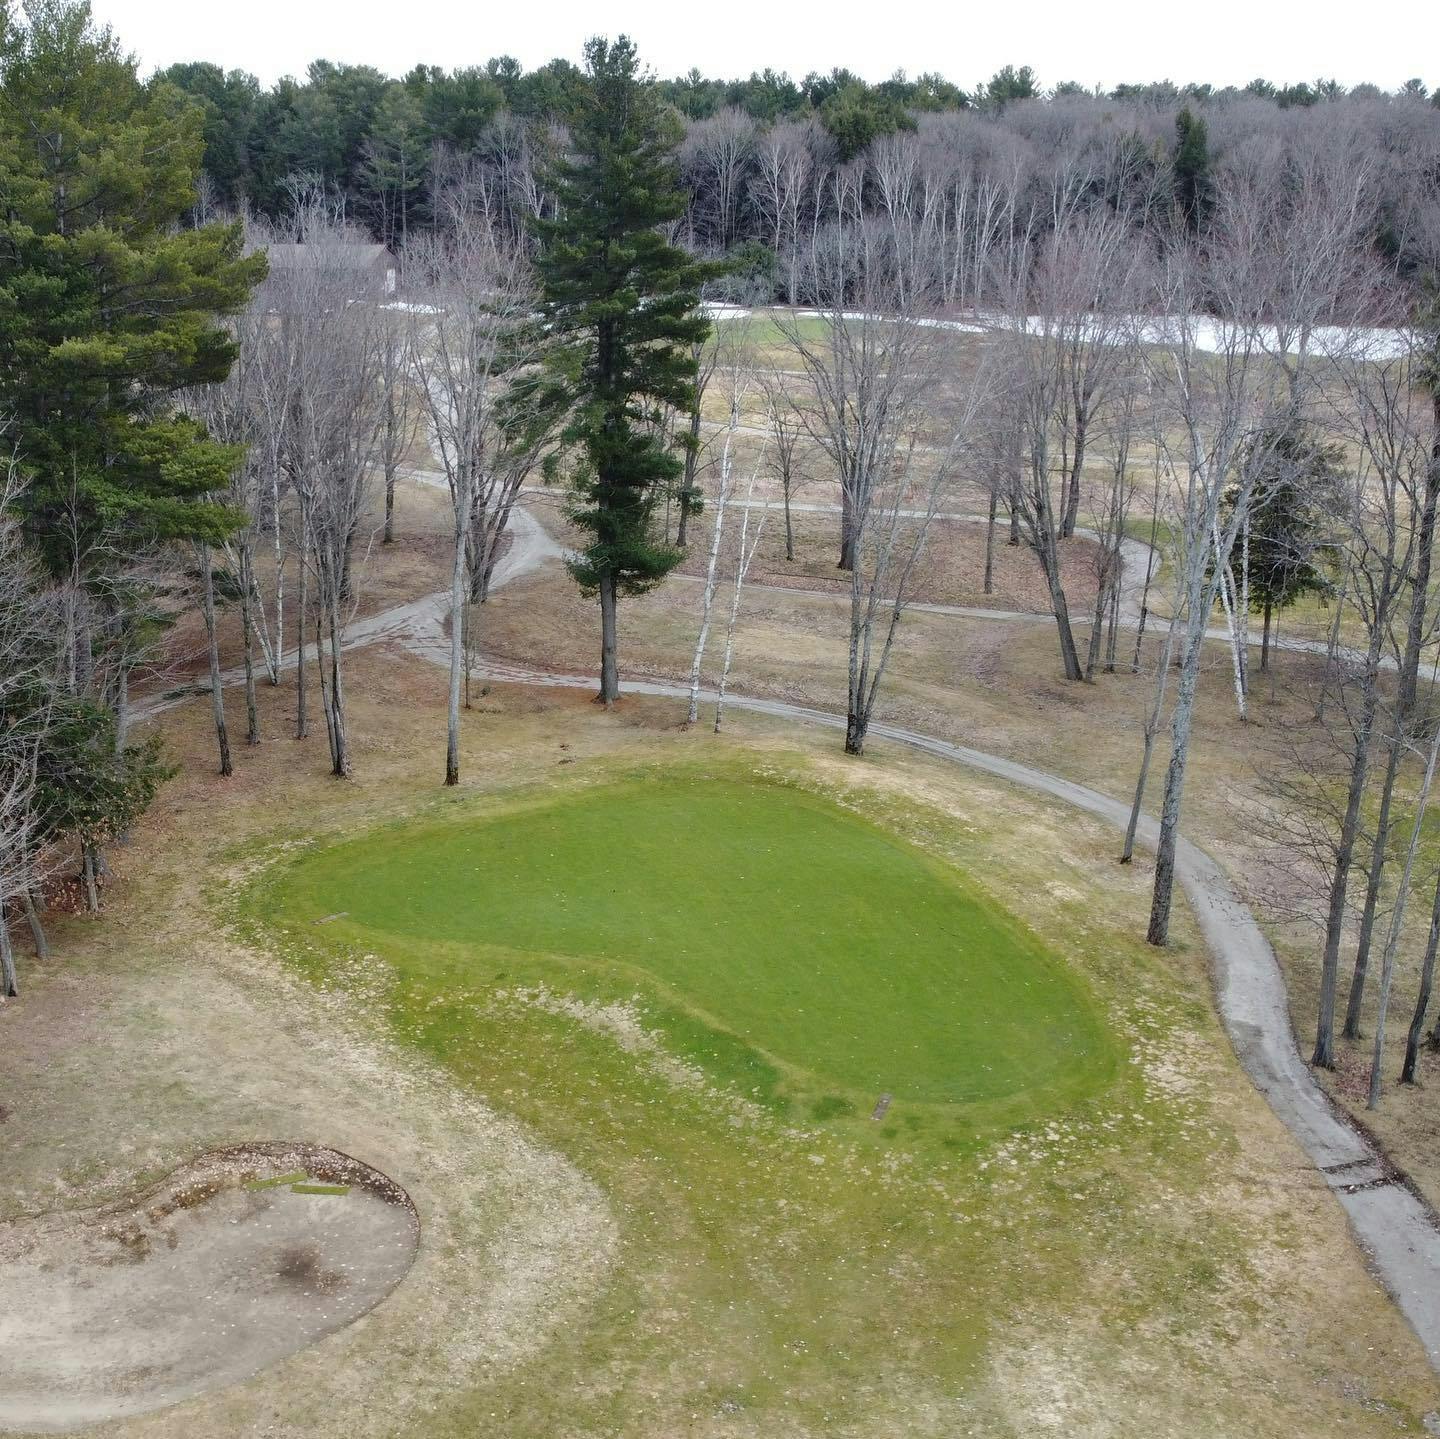 The snow is almost gone. Greens are looking awesome. Golf season is coming!